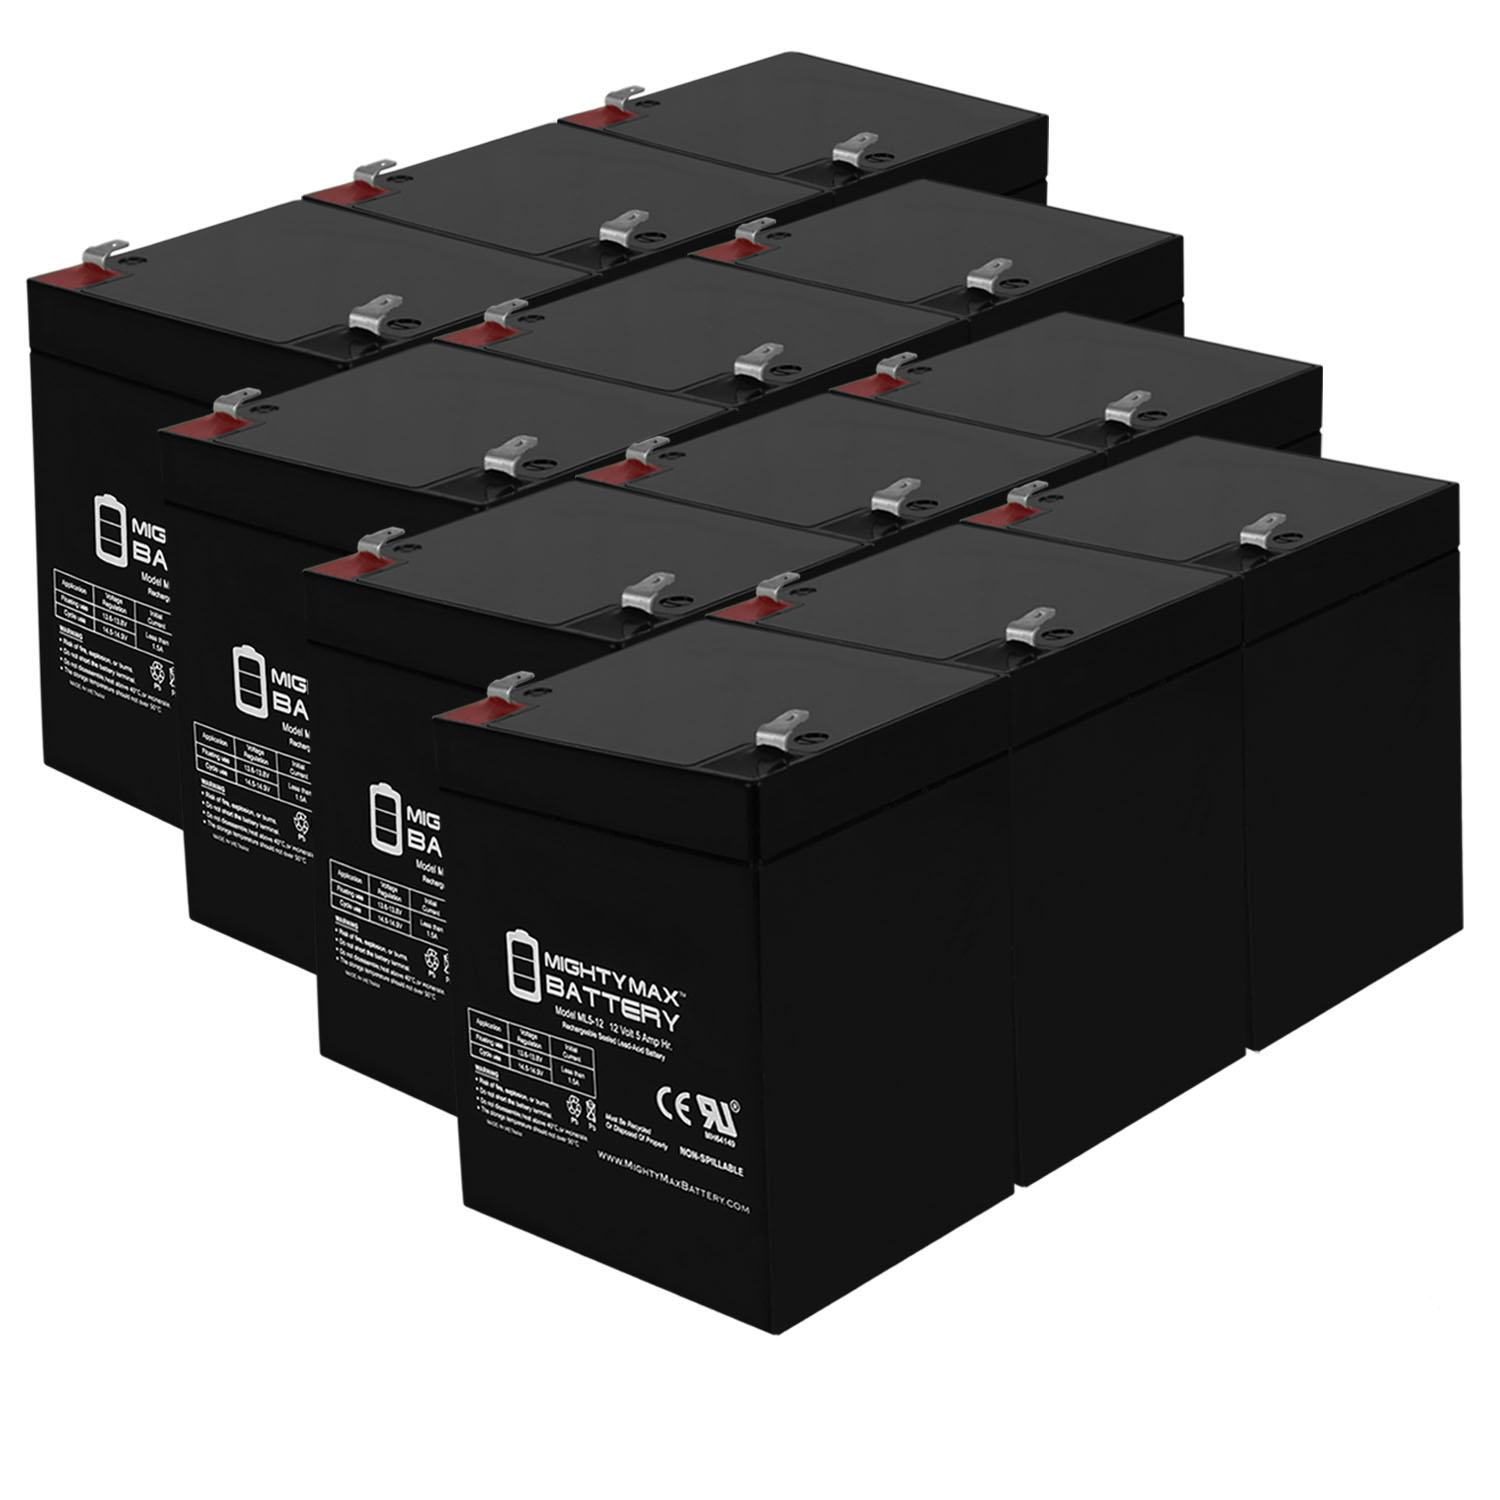 12V 5AH SLA Replacement Battery for Enersys 0809-0016 - 12 Pack